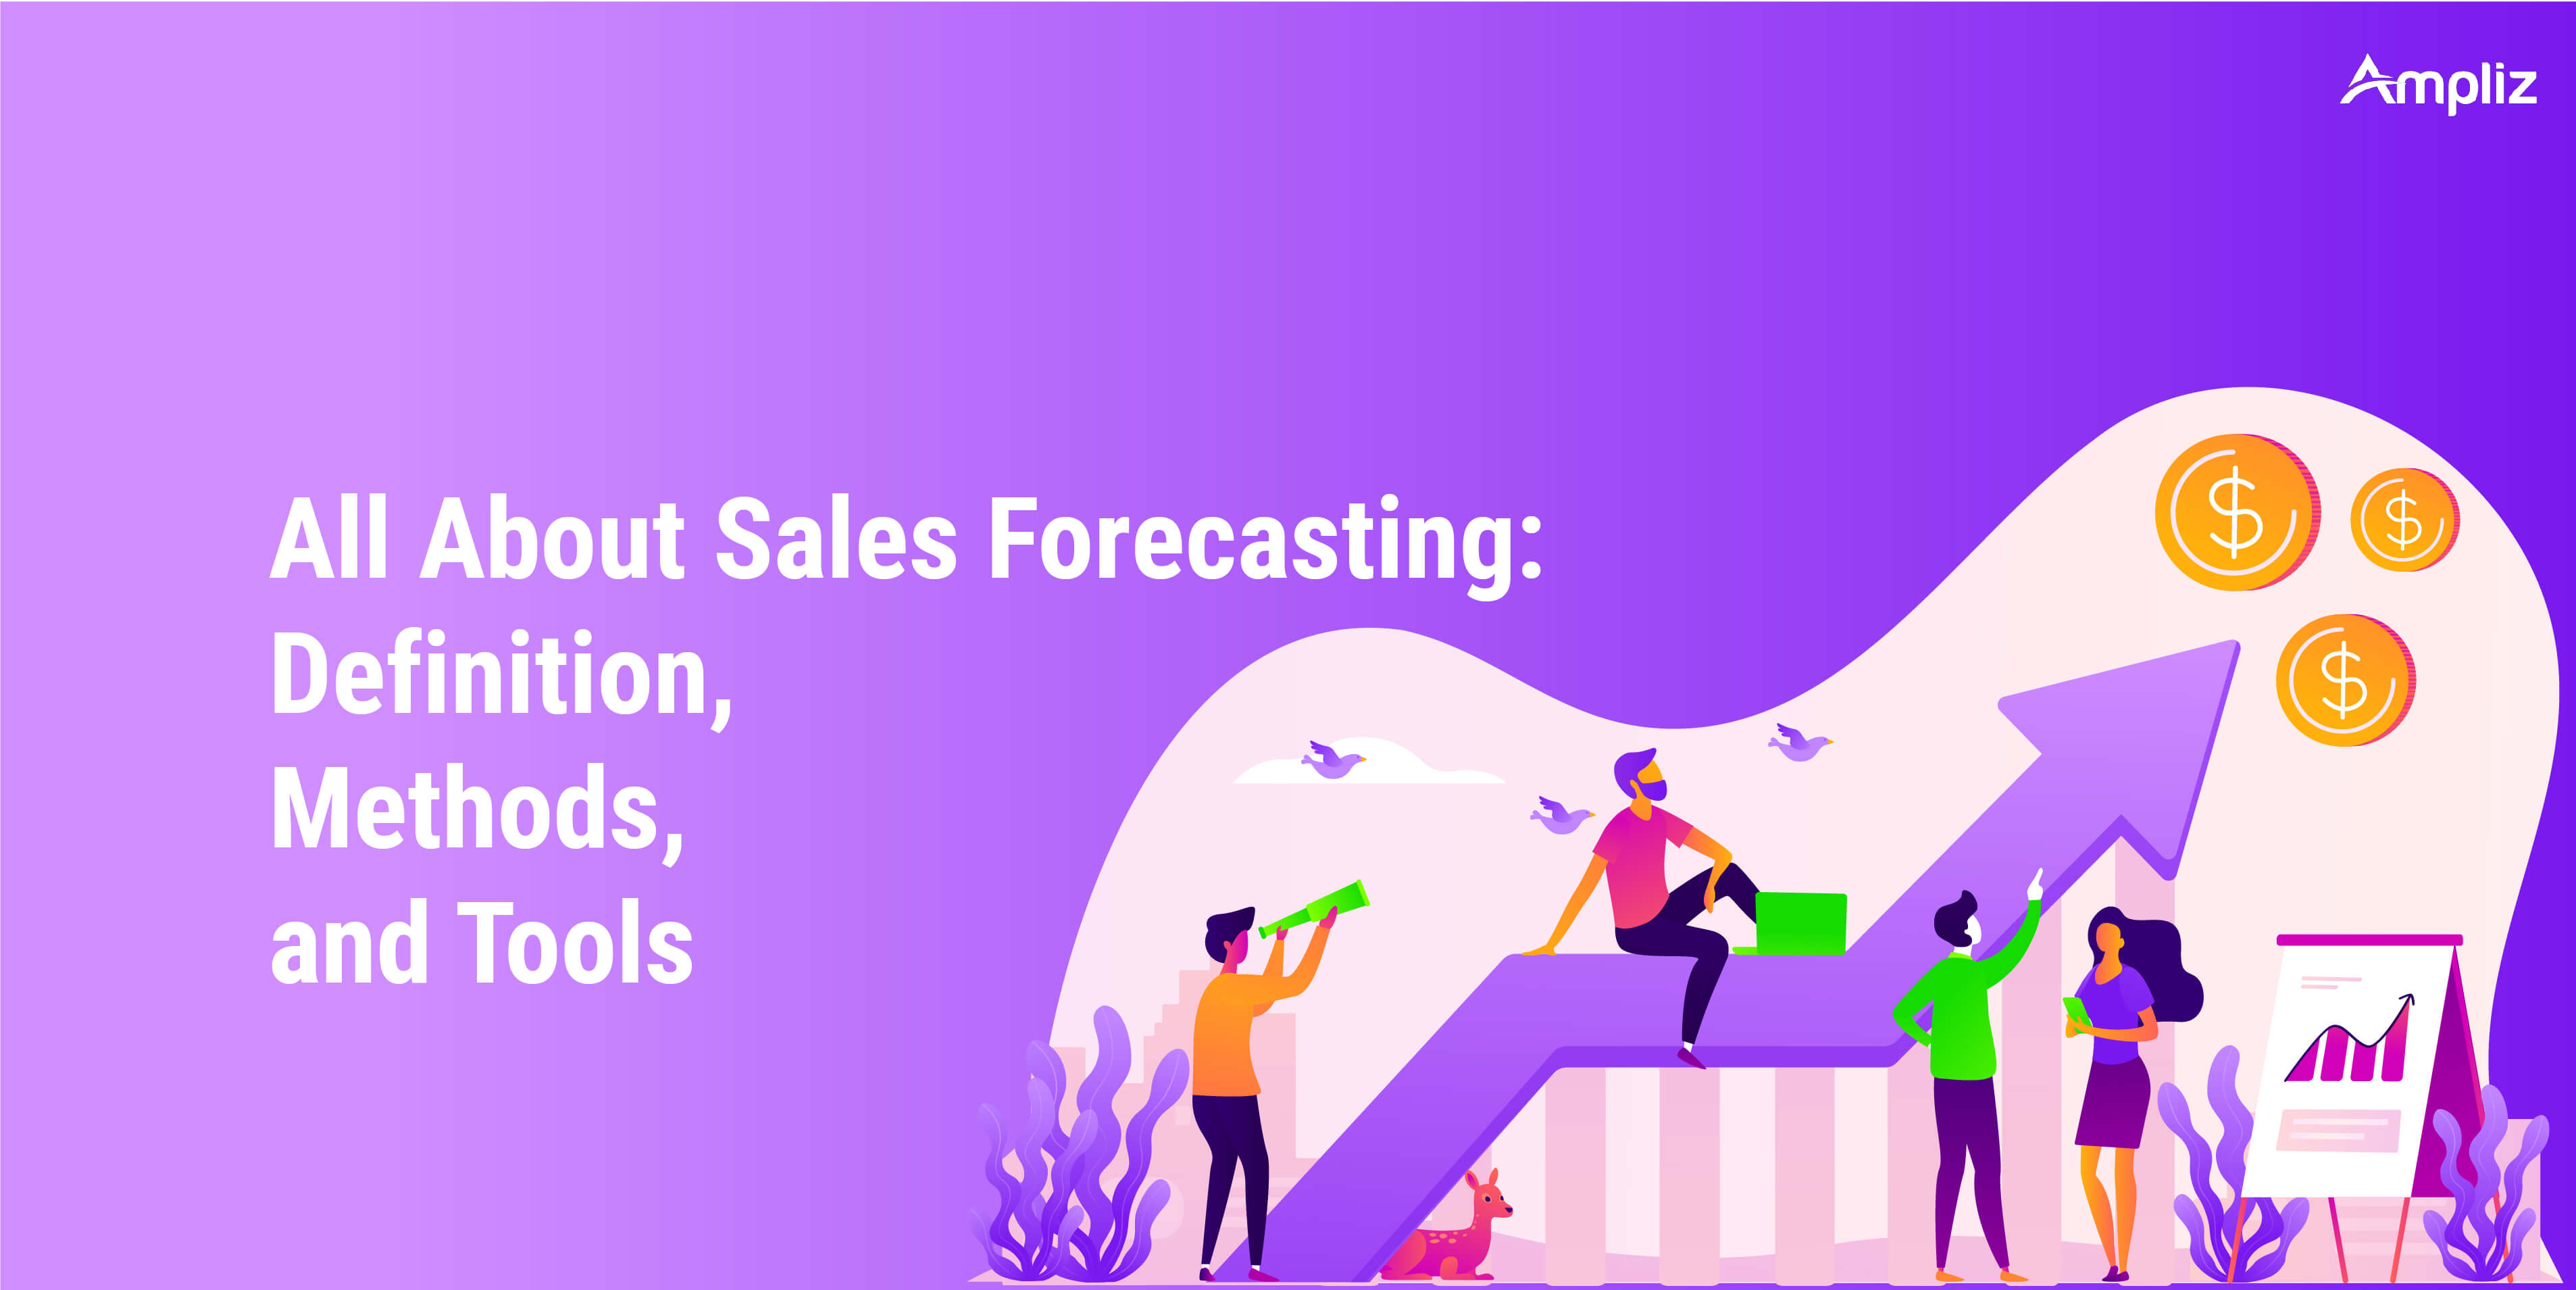 Sales forecasting - What is it and why is it important?